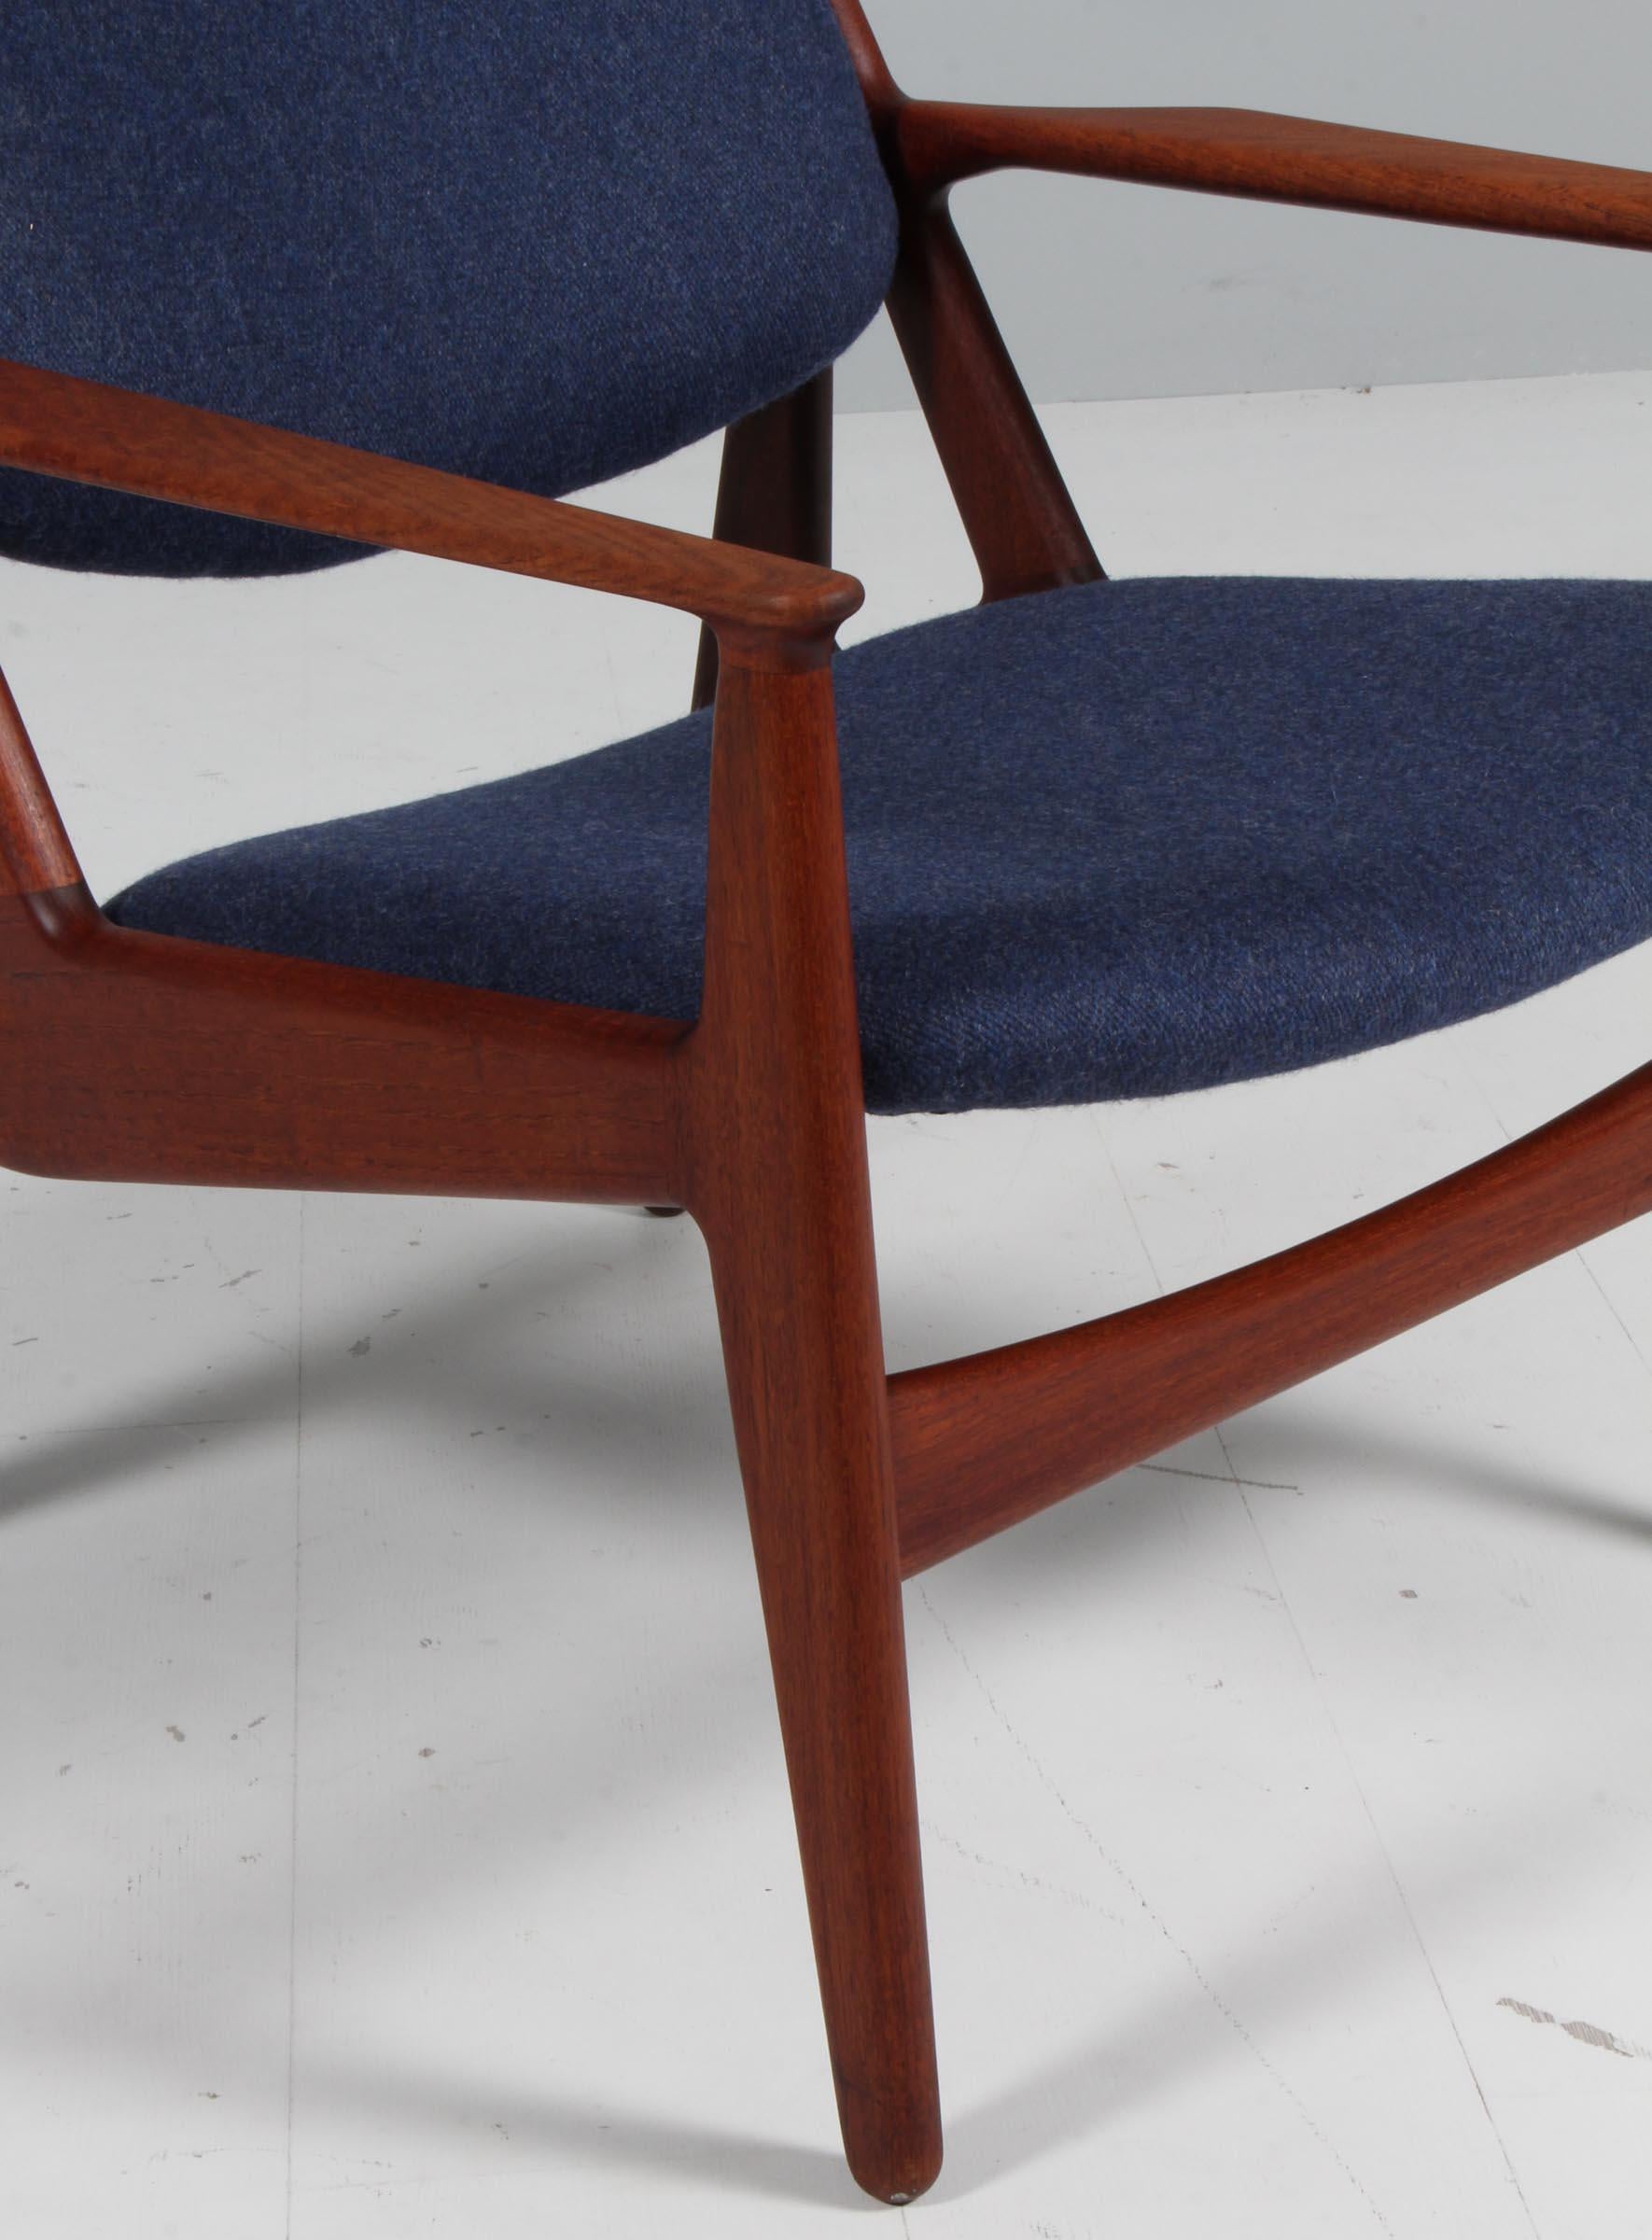 Arne Vodder Lounge Chairs, Solid Teak In Good Condition For Sale In Esbjerg, DK